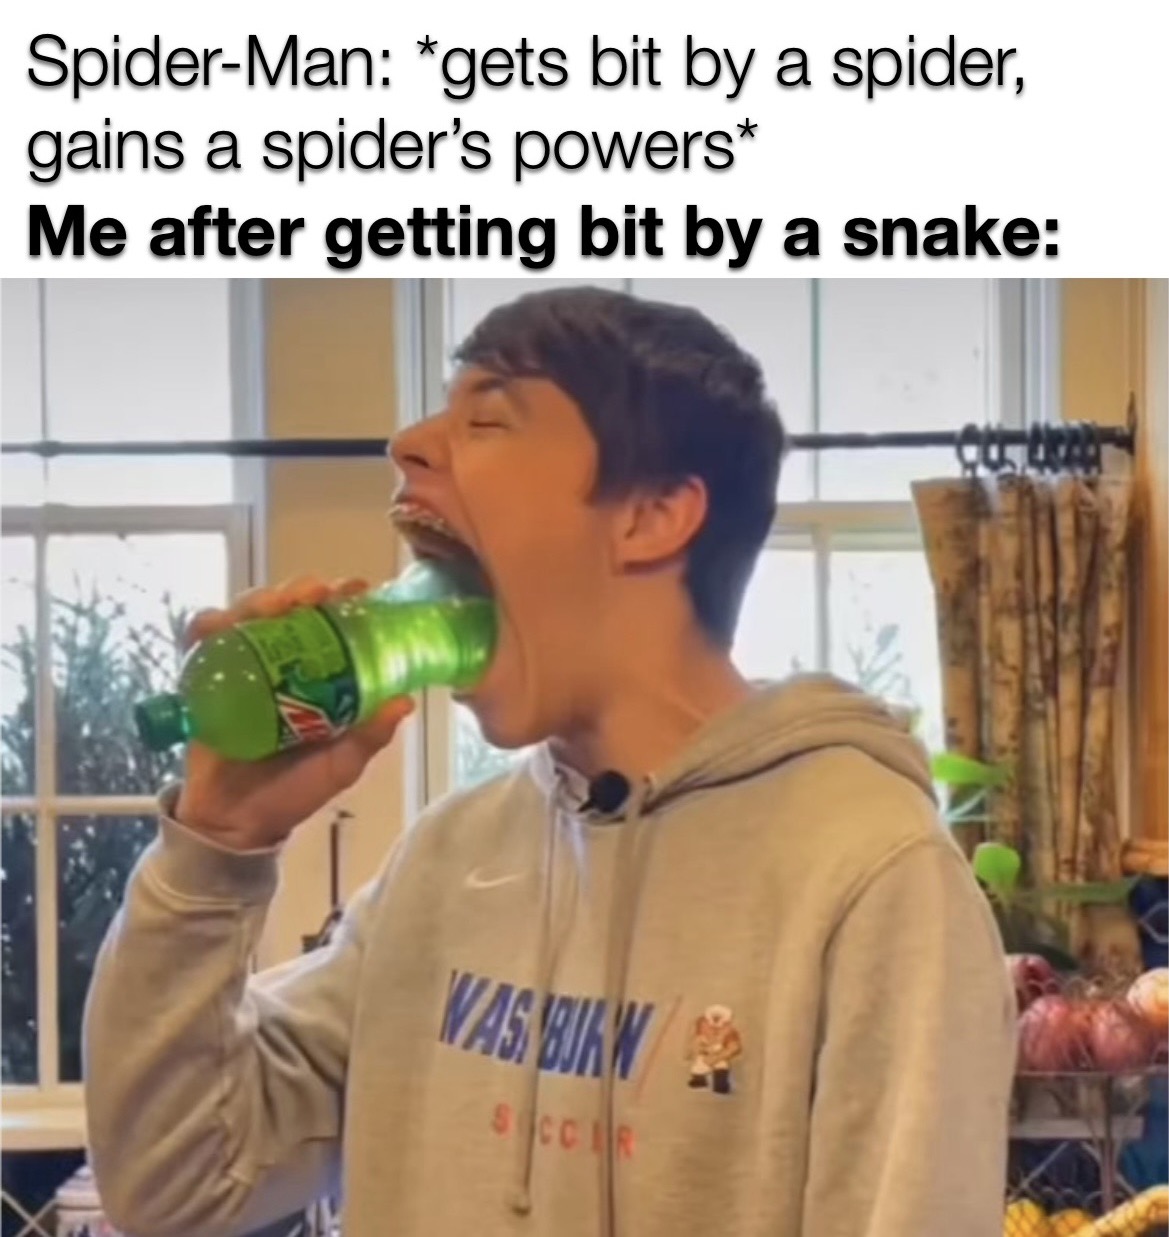 funny memes - dank memes drink - SpiderMan gets bit by a spider, gains a spider's powers Me after getting bit by a snake Was Biaw Siccar